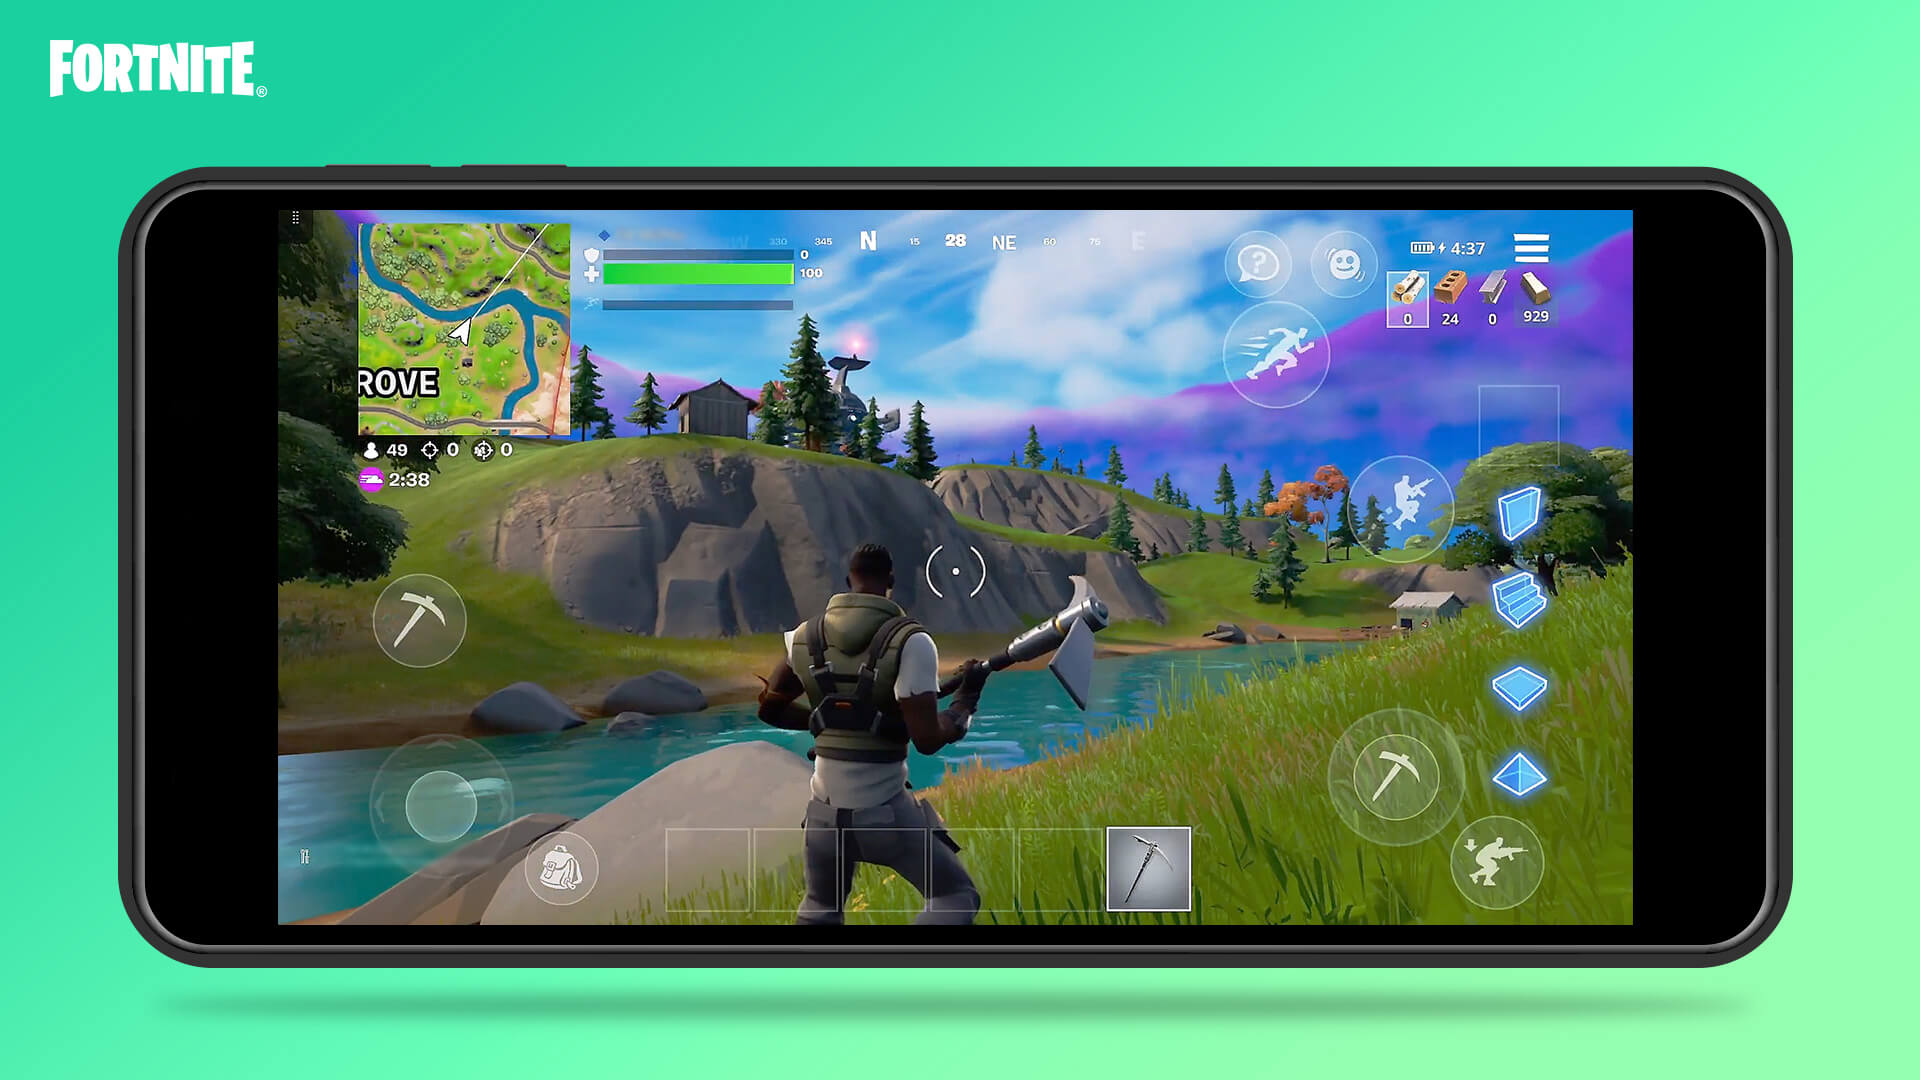 How to Play Fortnite on iOS via Xbox Cloud Gaming for FREE! Play Fortnite  on iPhone or iPad in 2022! 